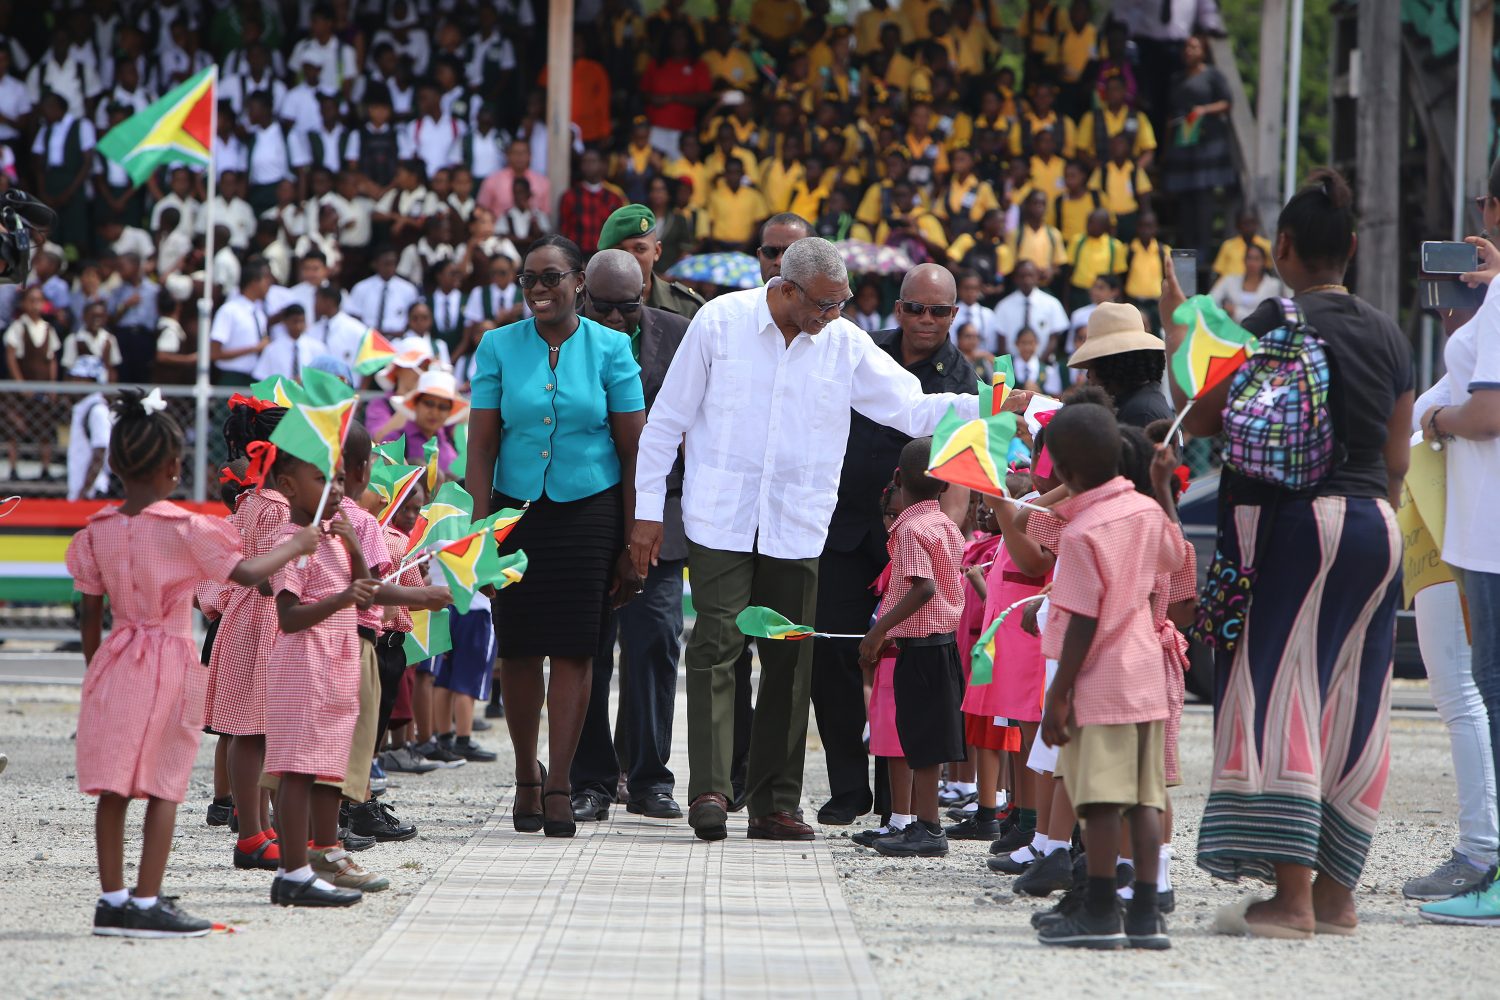 Education Minister Nicolette Henry and President David Granger greet students at D’Urban Park, where the National Education Day rally and exhibition was held. (Photo by Keno George)